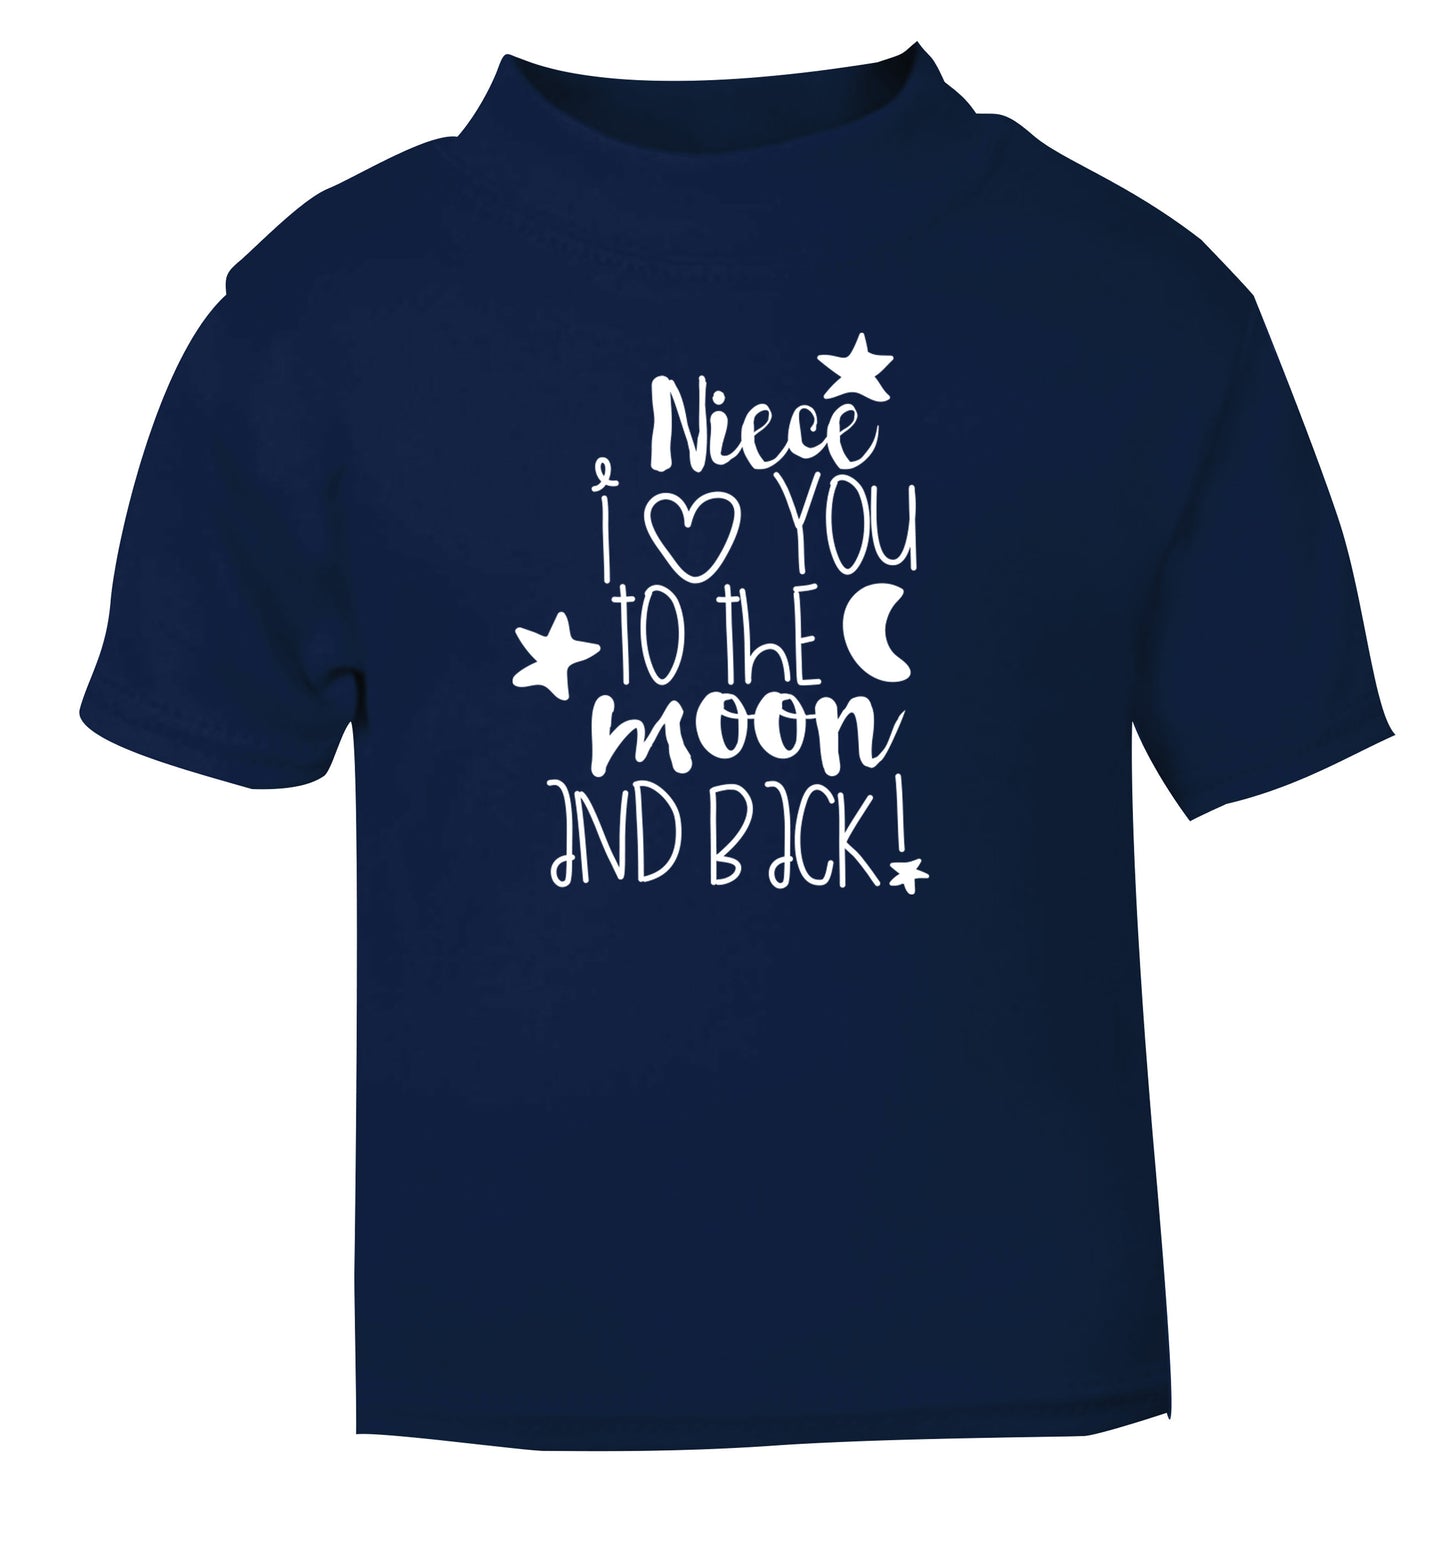 Niece I love you to the moon and back navy Baby Toddler Tshirt 2 Years